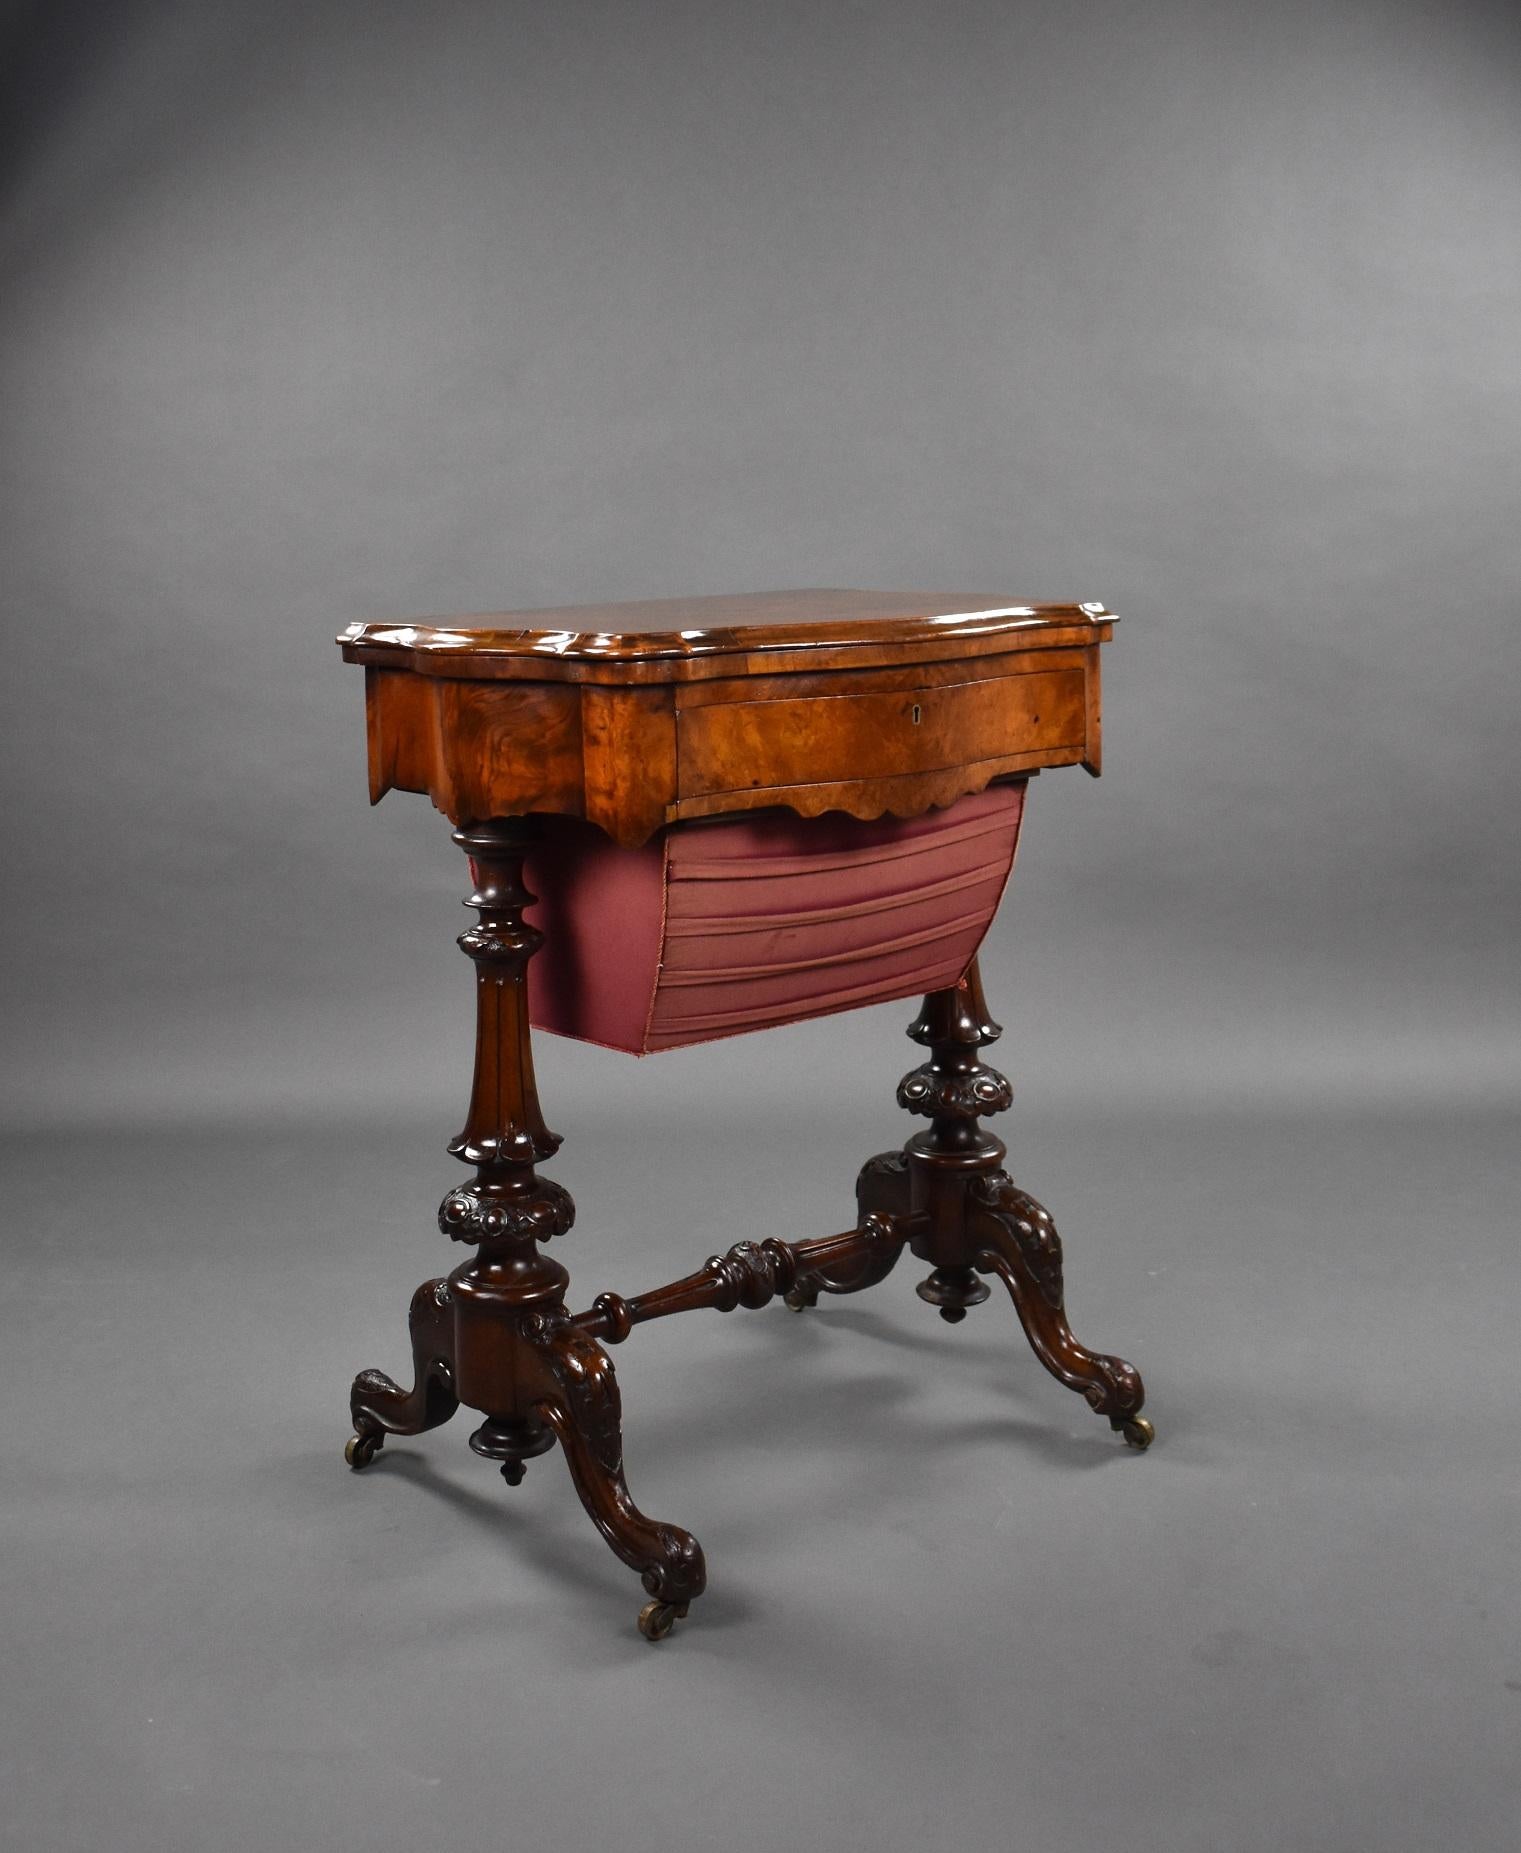 A good quality Victorian burr walnut work table / games table. The top of the table swivels and folds over to reveal a board for chess and for back gammon. Below this is a fitted drawer, above a pull out basket. The table has ornately carved legs